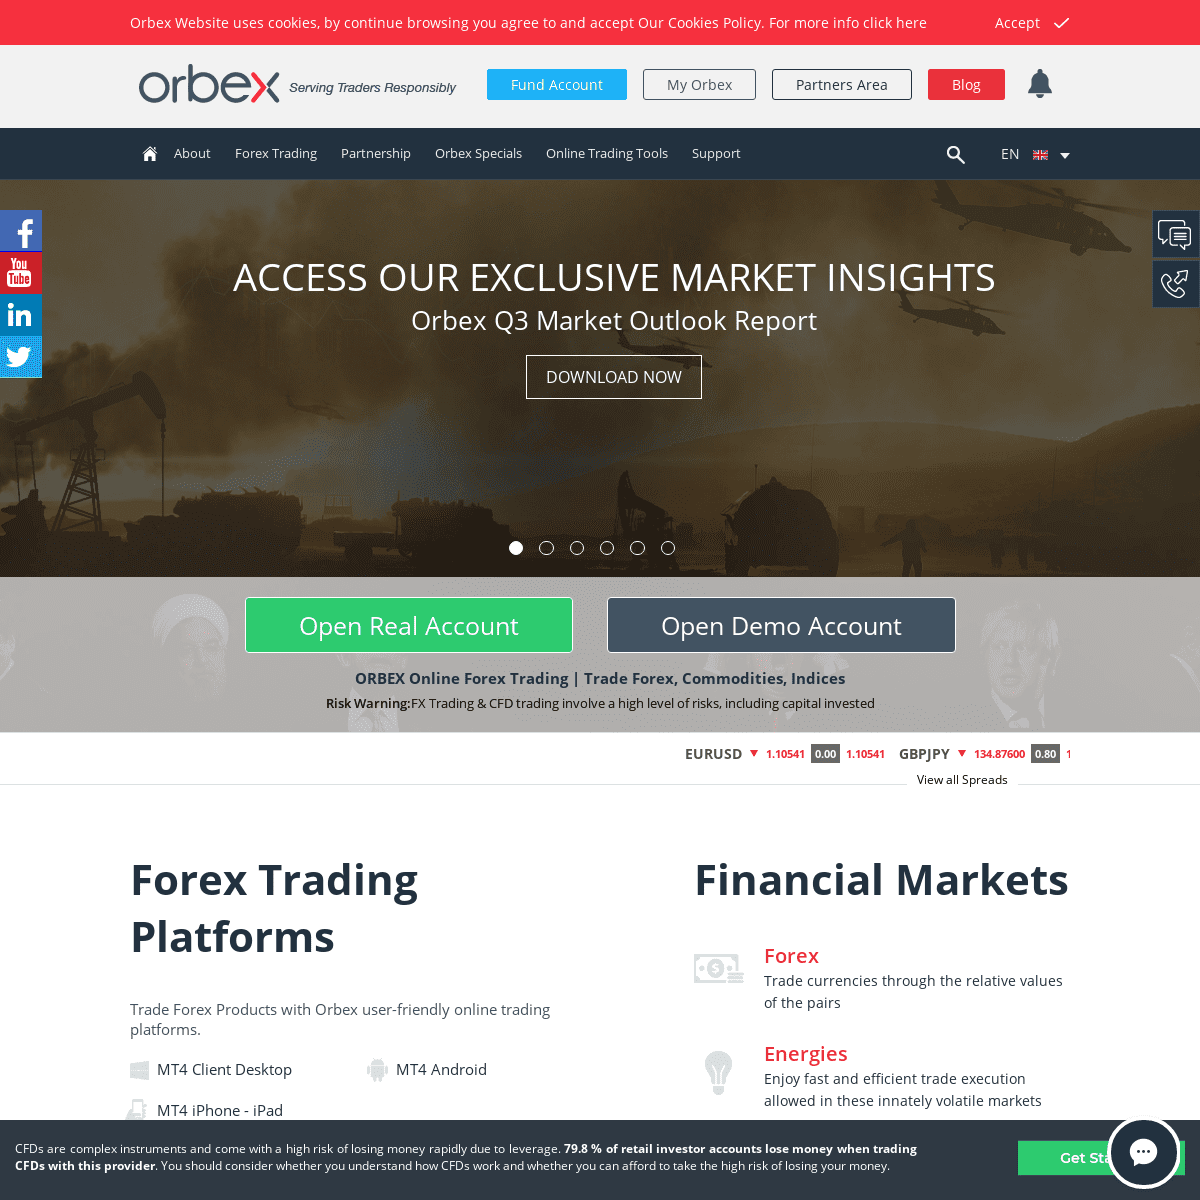 Online Forex Trading | Trade Forex, Commodities, Indices | ORBEX